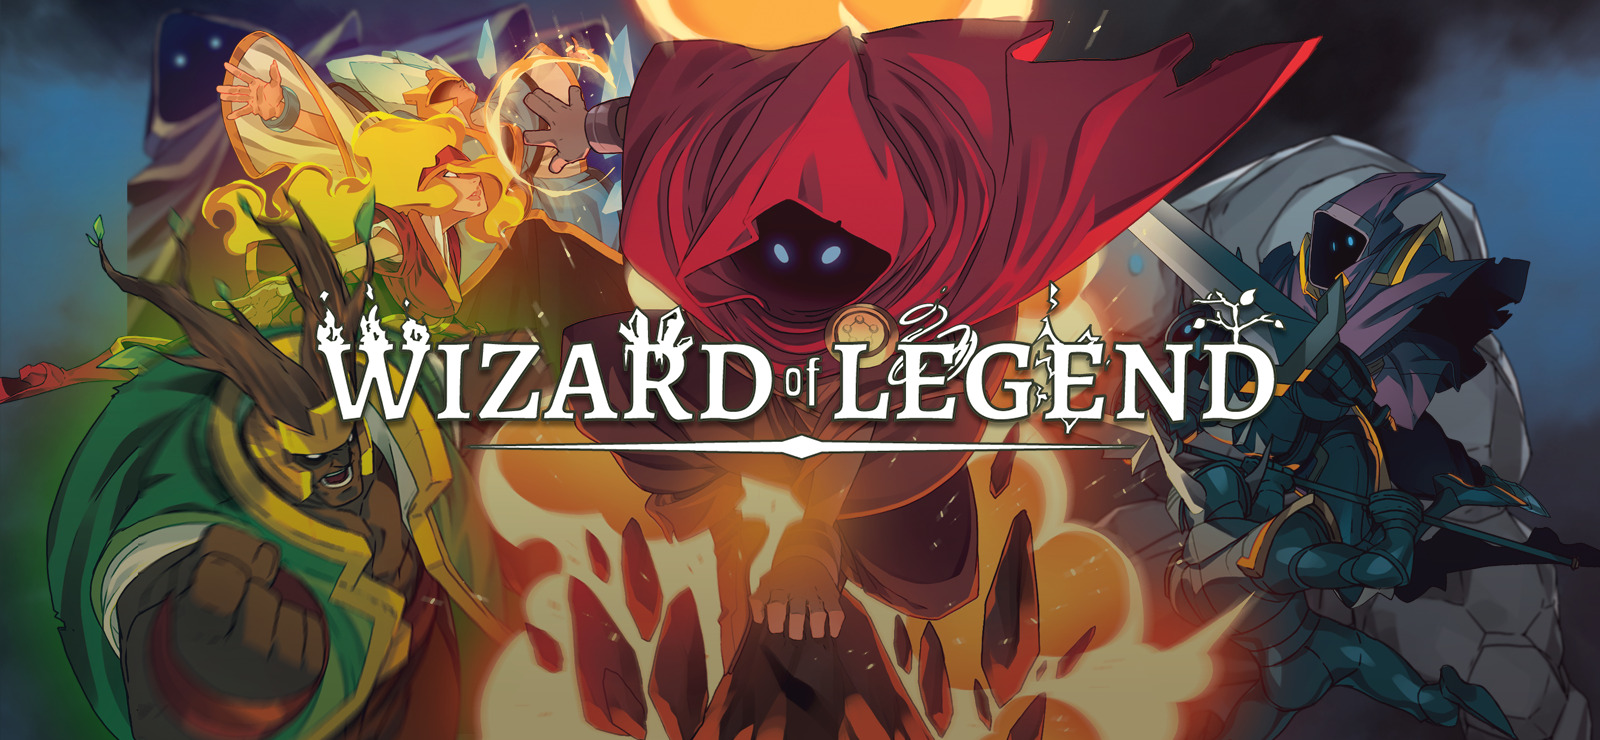 Wizard of Legend on